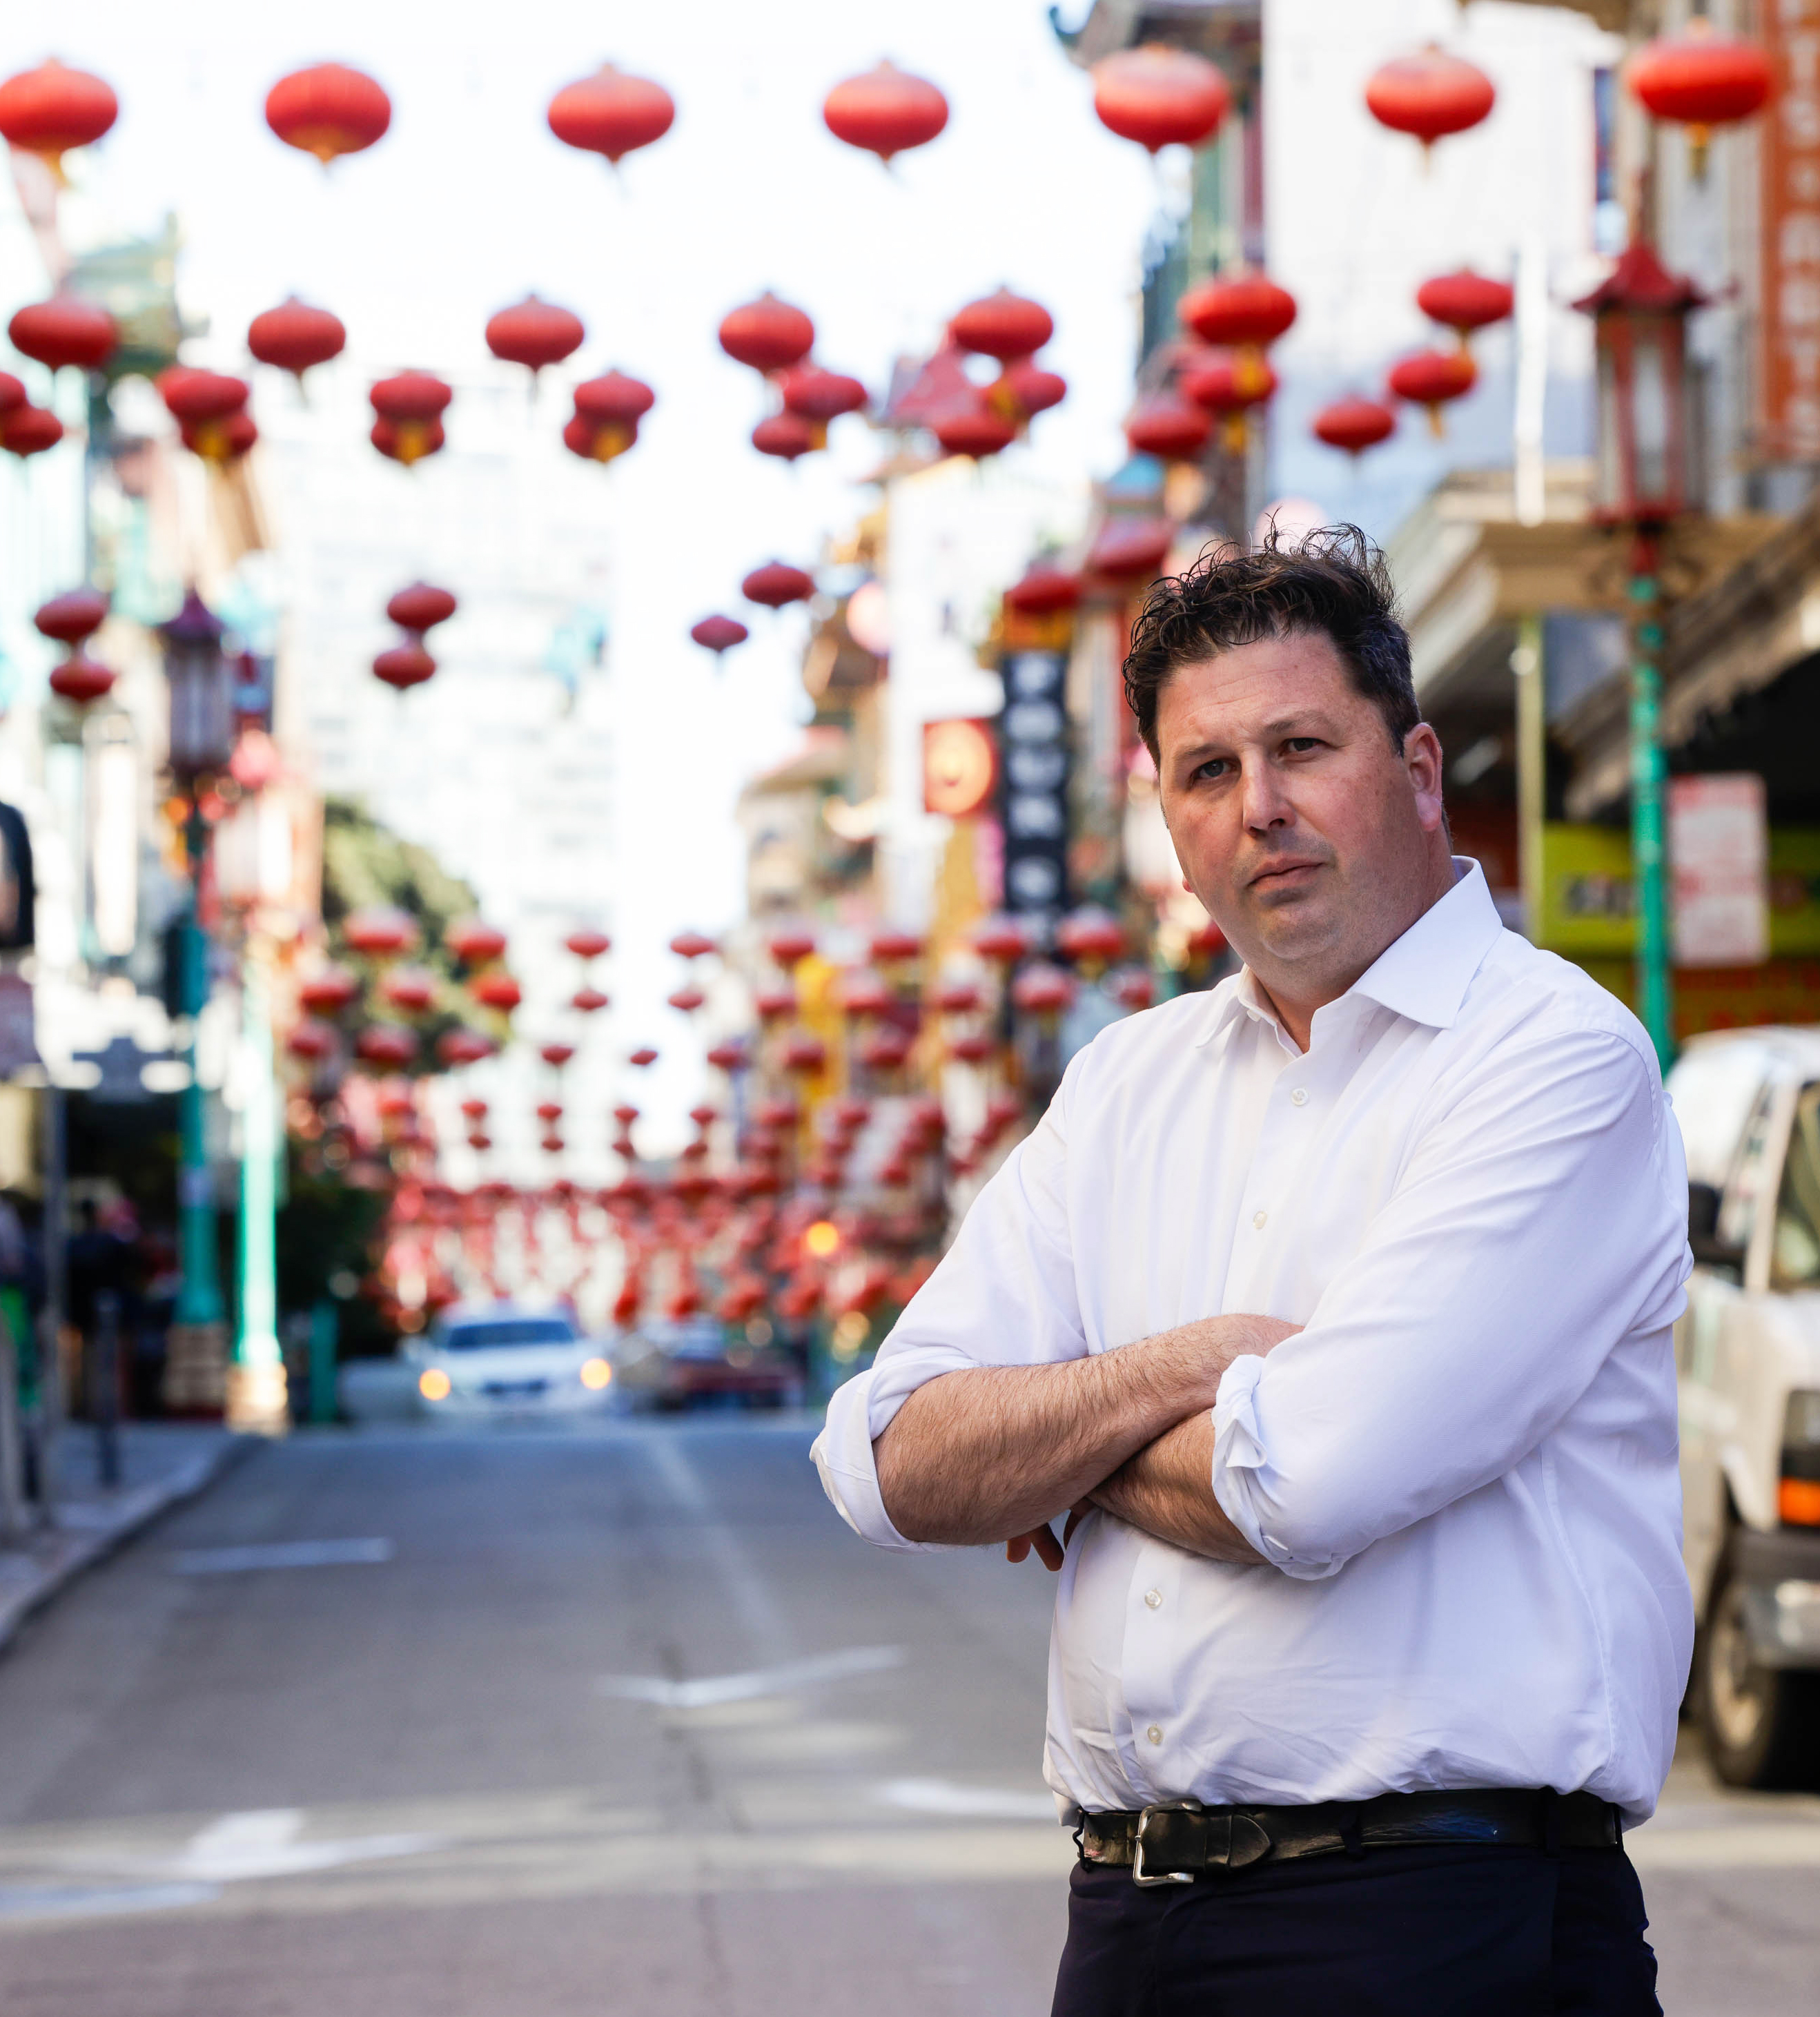 A man stands with arms crossed on a street lined with red lanterns above.